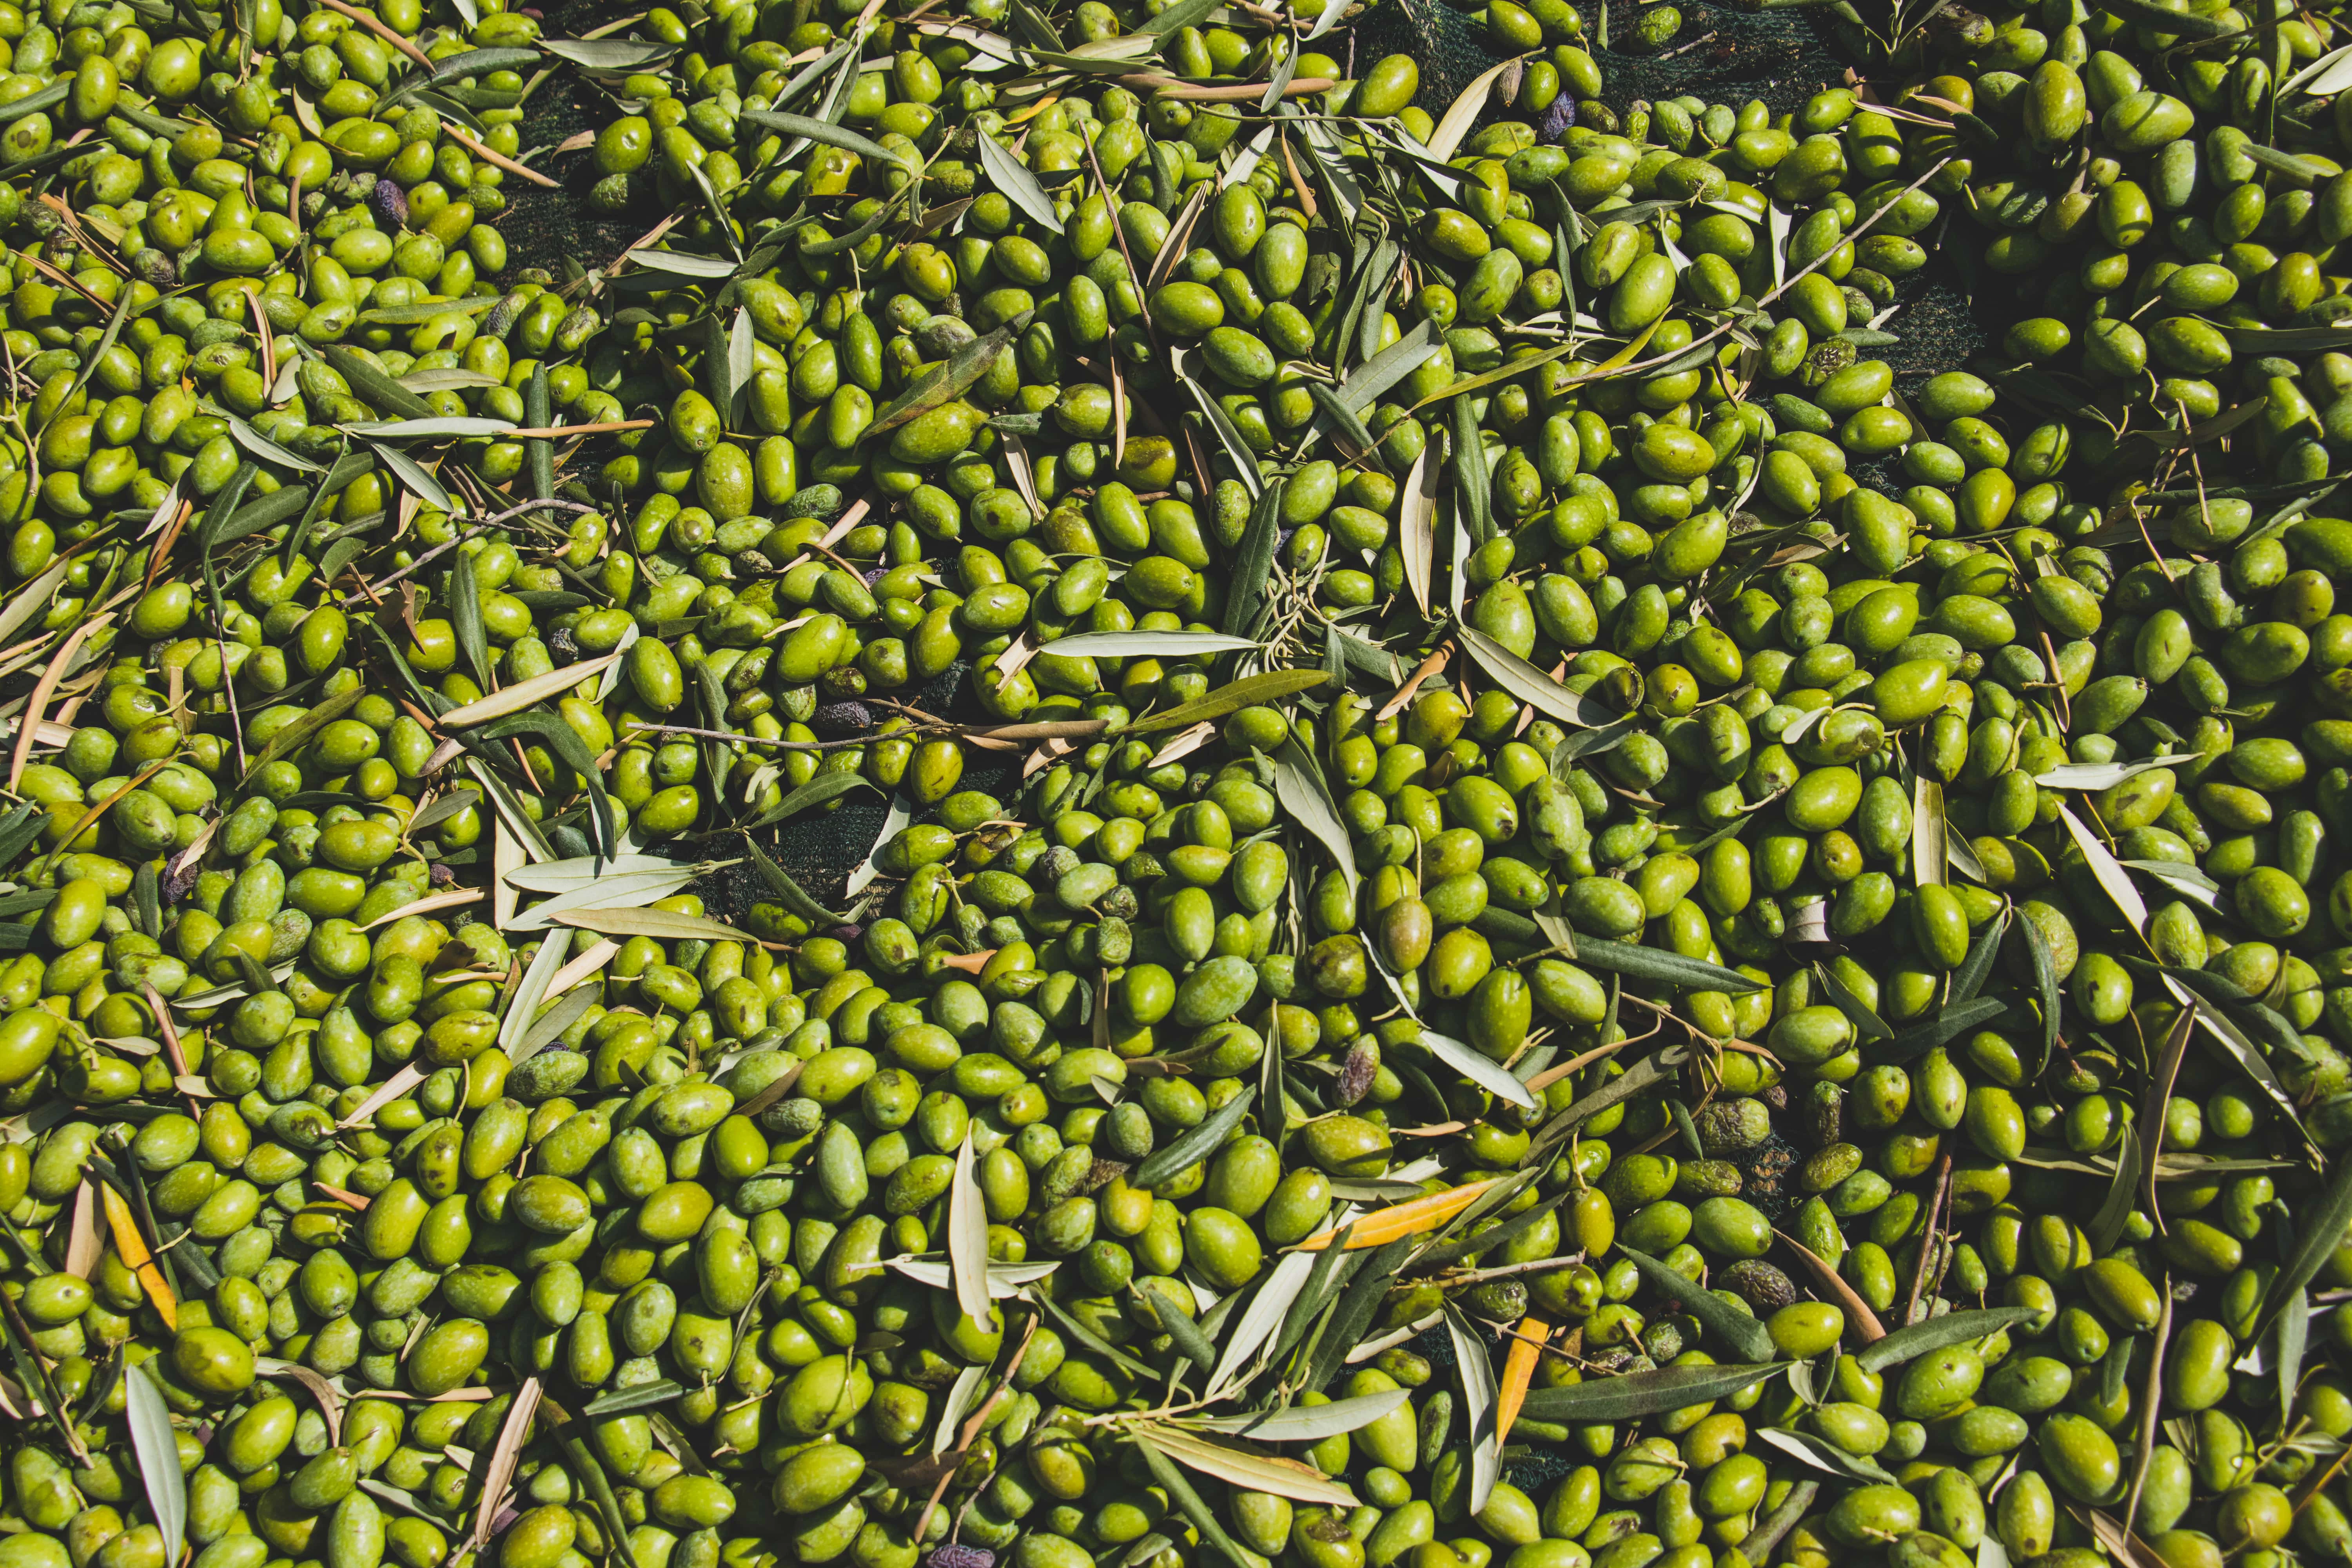 A pile of large green Nocellara del belice olives with some leaves.